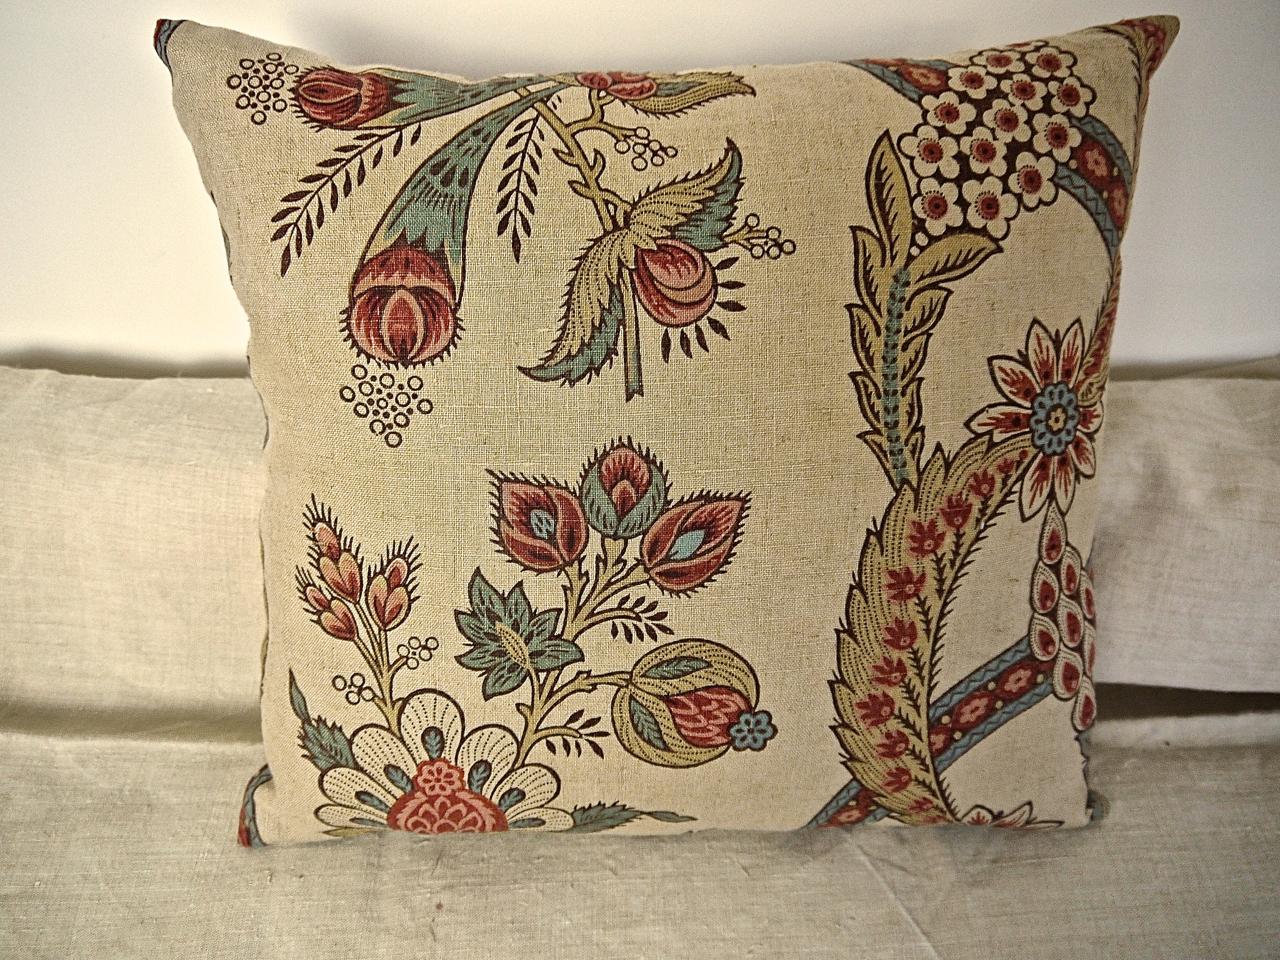 French later 19th century linen cushion with a large scale design of stylised flowers and a patterned and twisting column. The flowers and buds printed in shades of soft raspberry red and a pale blue. Self-backed and slipstitched closed with a duck